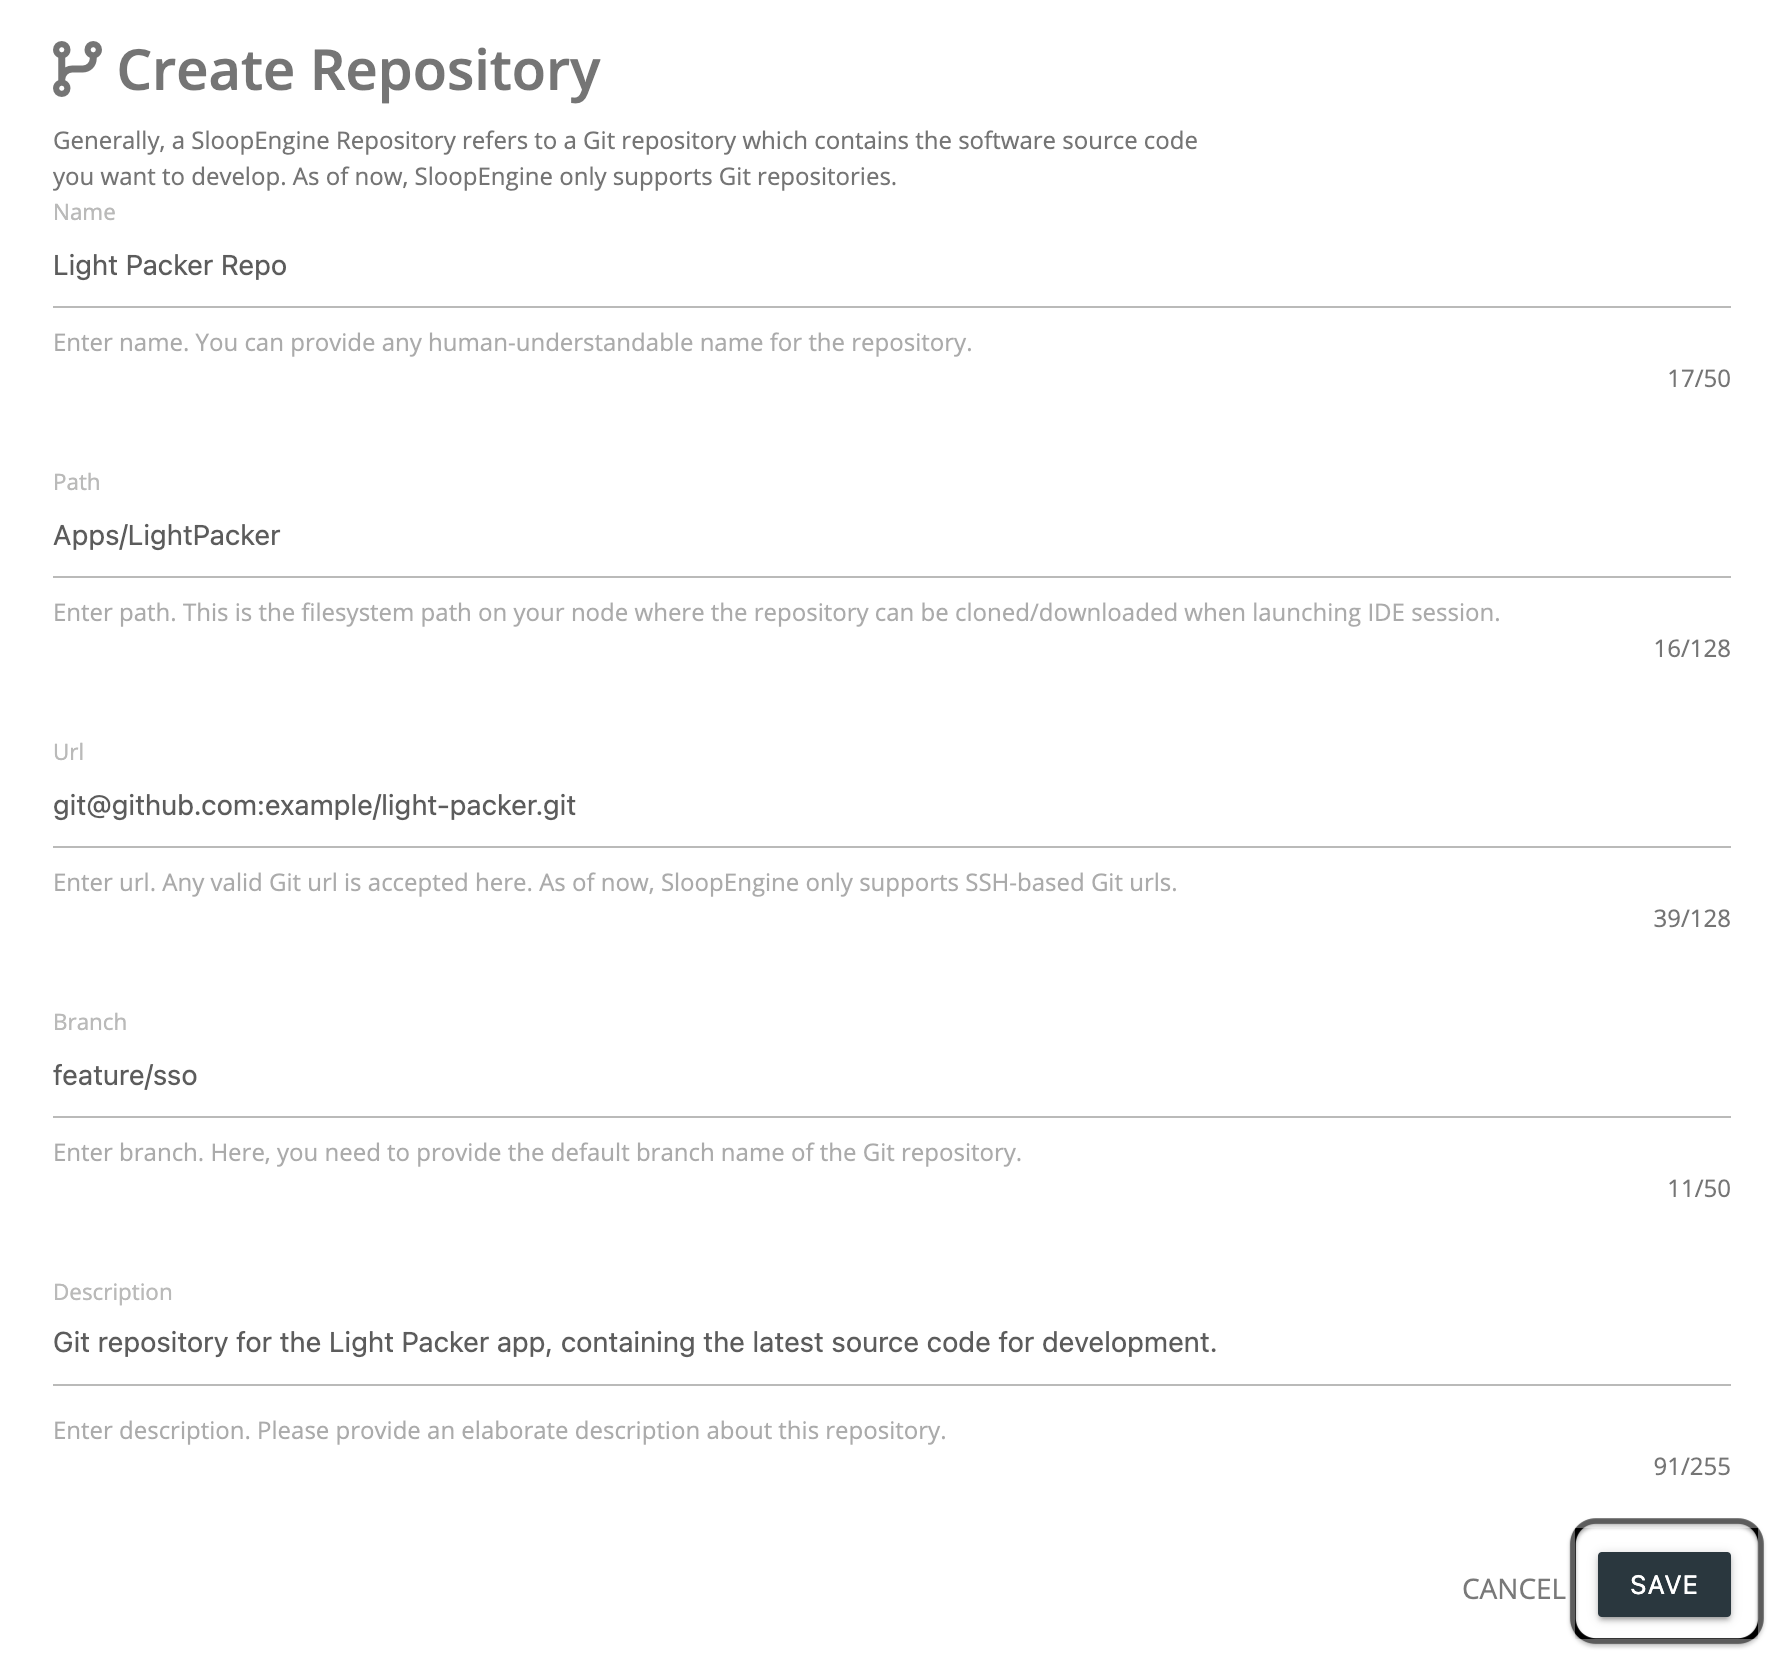 Screenshot of the repository creation form with valid information.